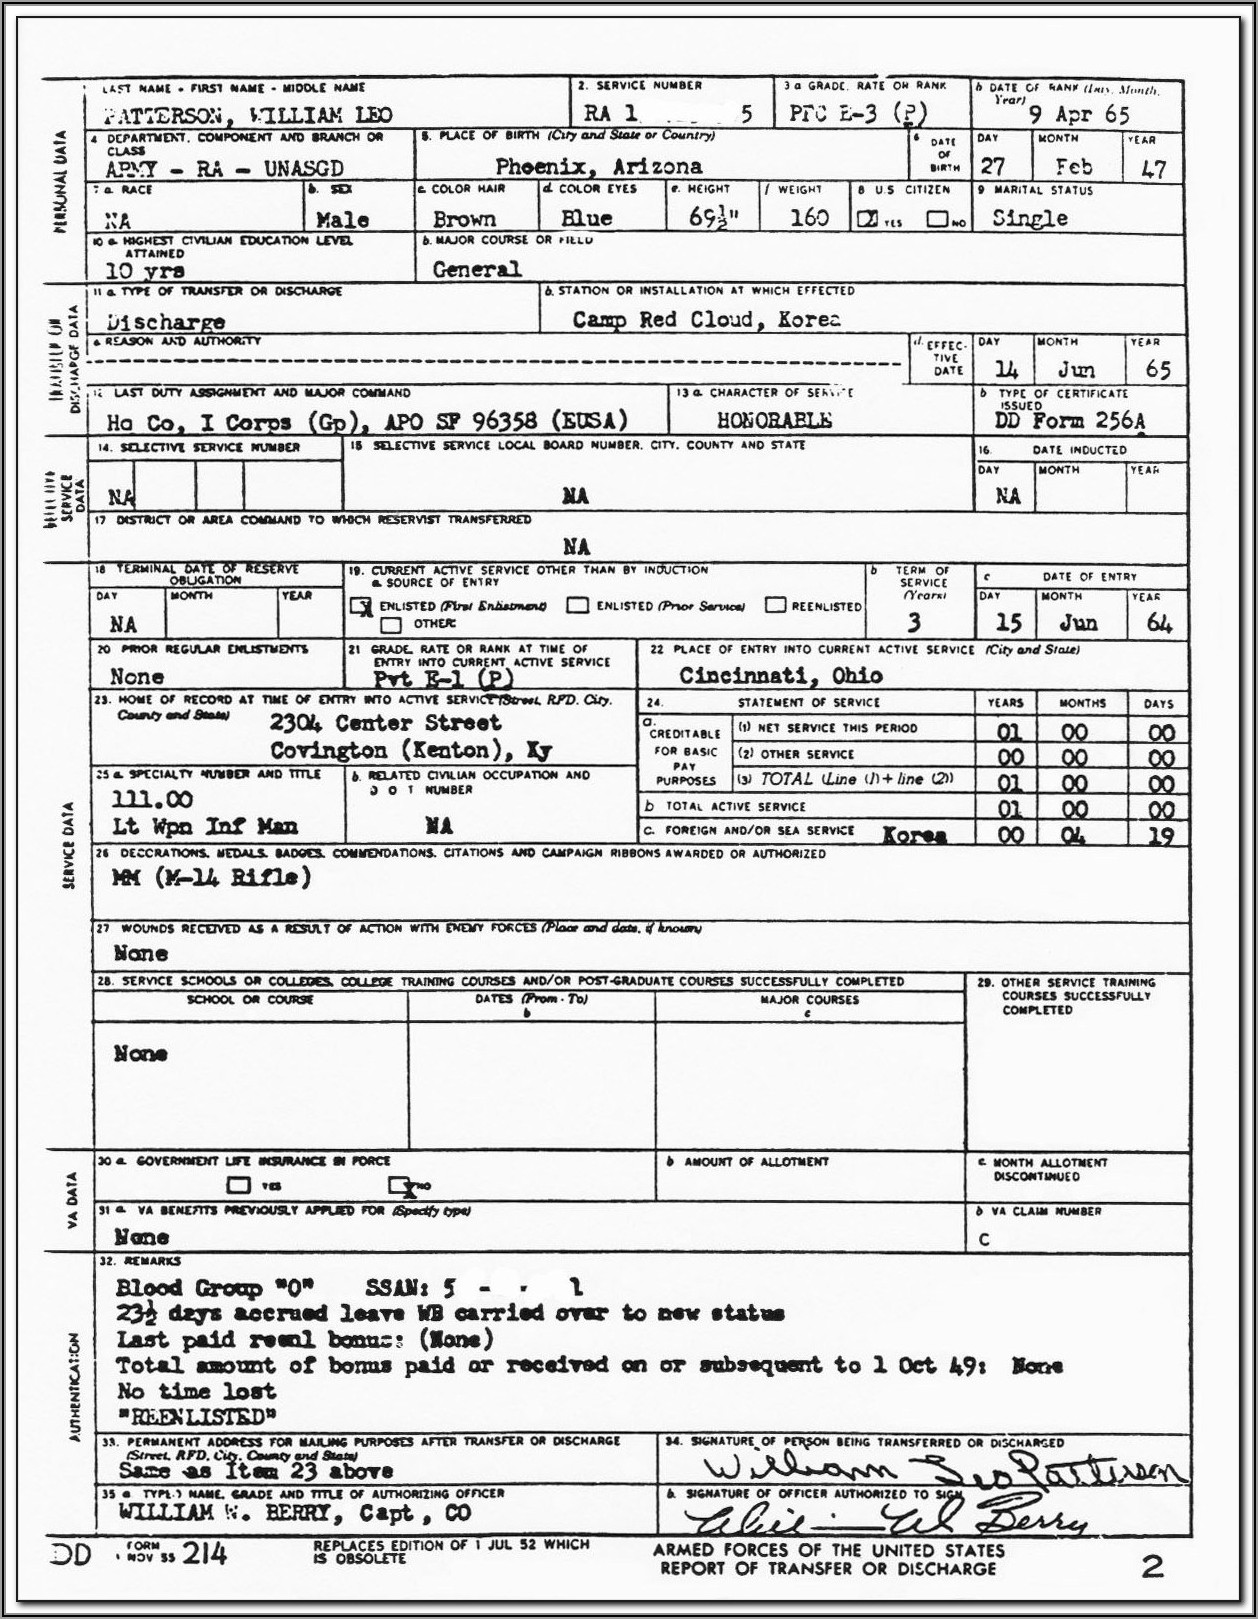 form-sf-180-sf-180-request-pertaining-to-military-records-omb-3095-0029